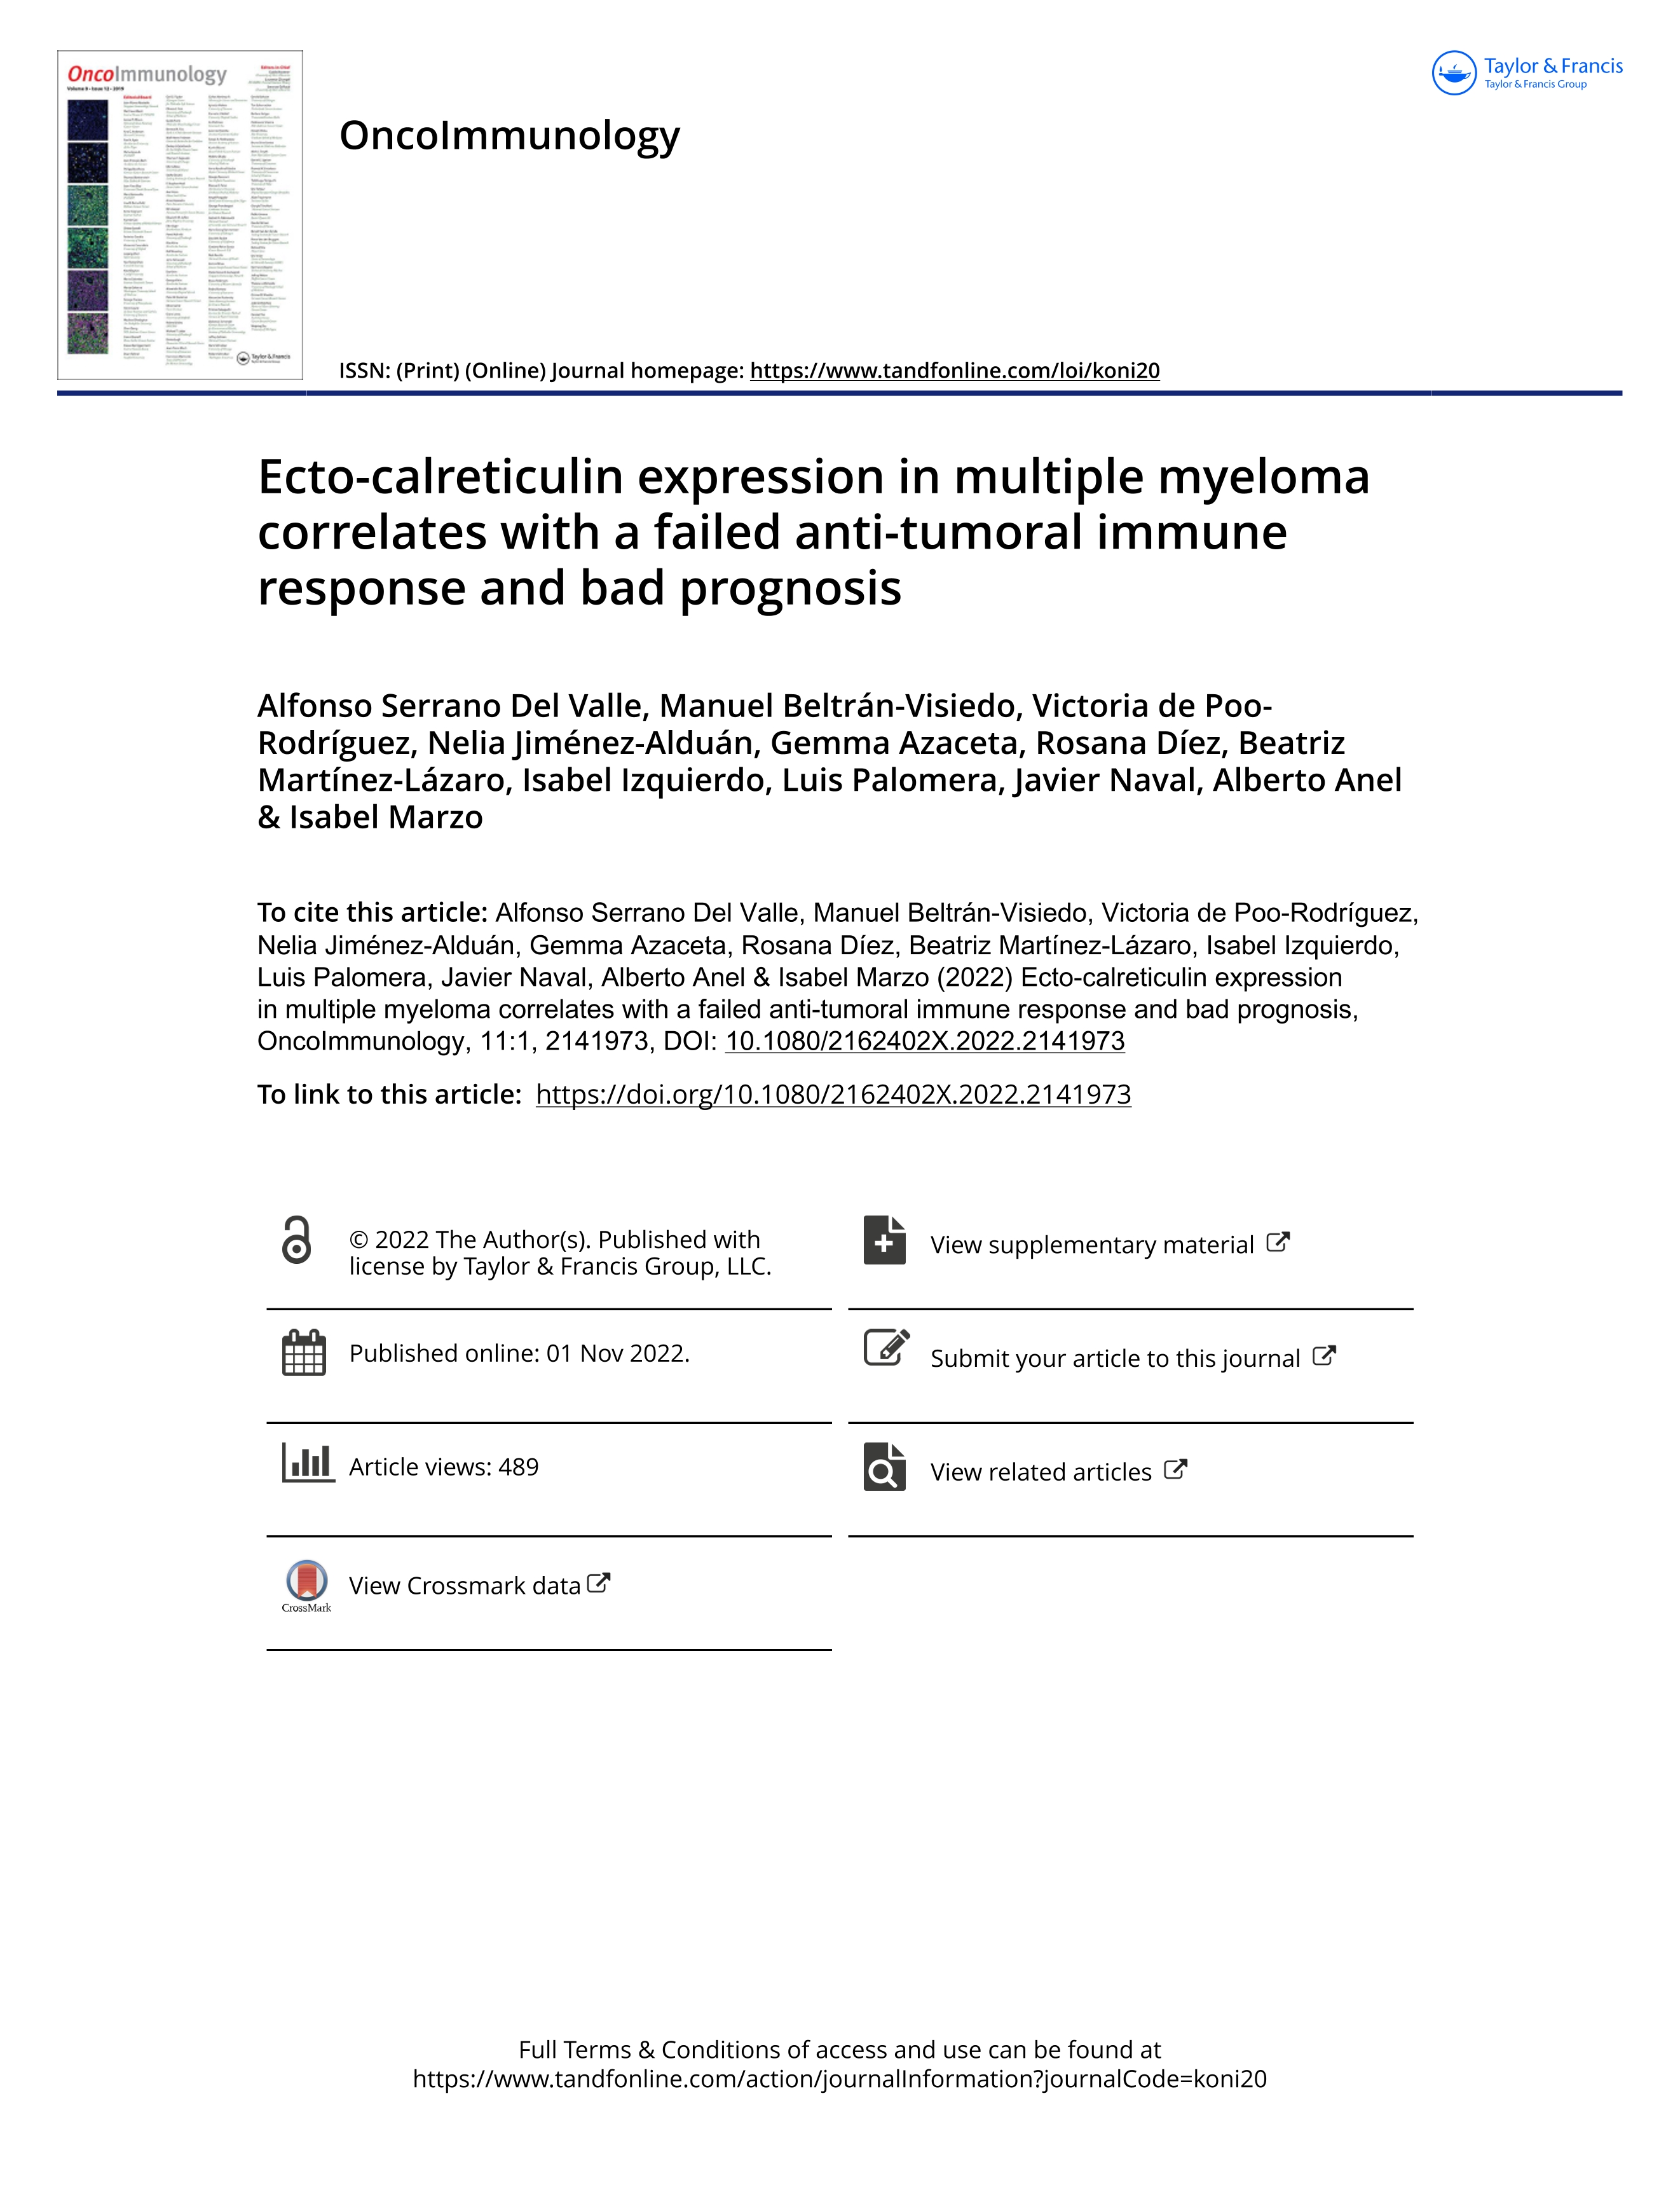 Ecto-calreticulin expression in multiple myeloma correlates with a failed anti-tumoral immune response and bad prognosis